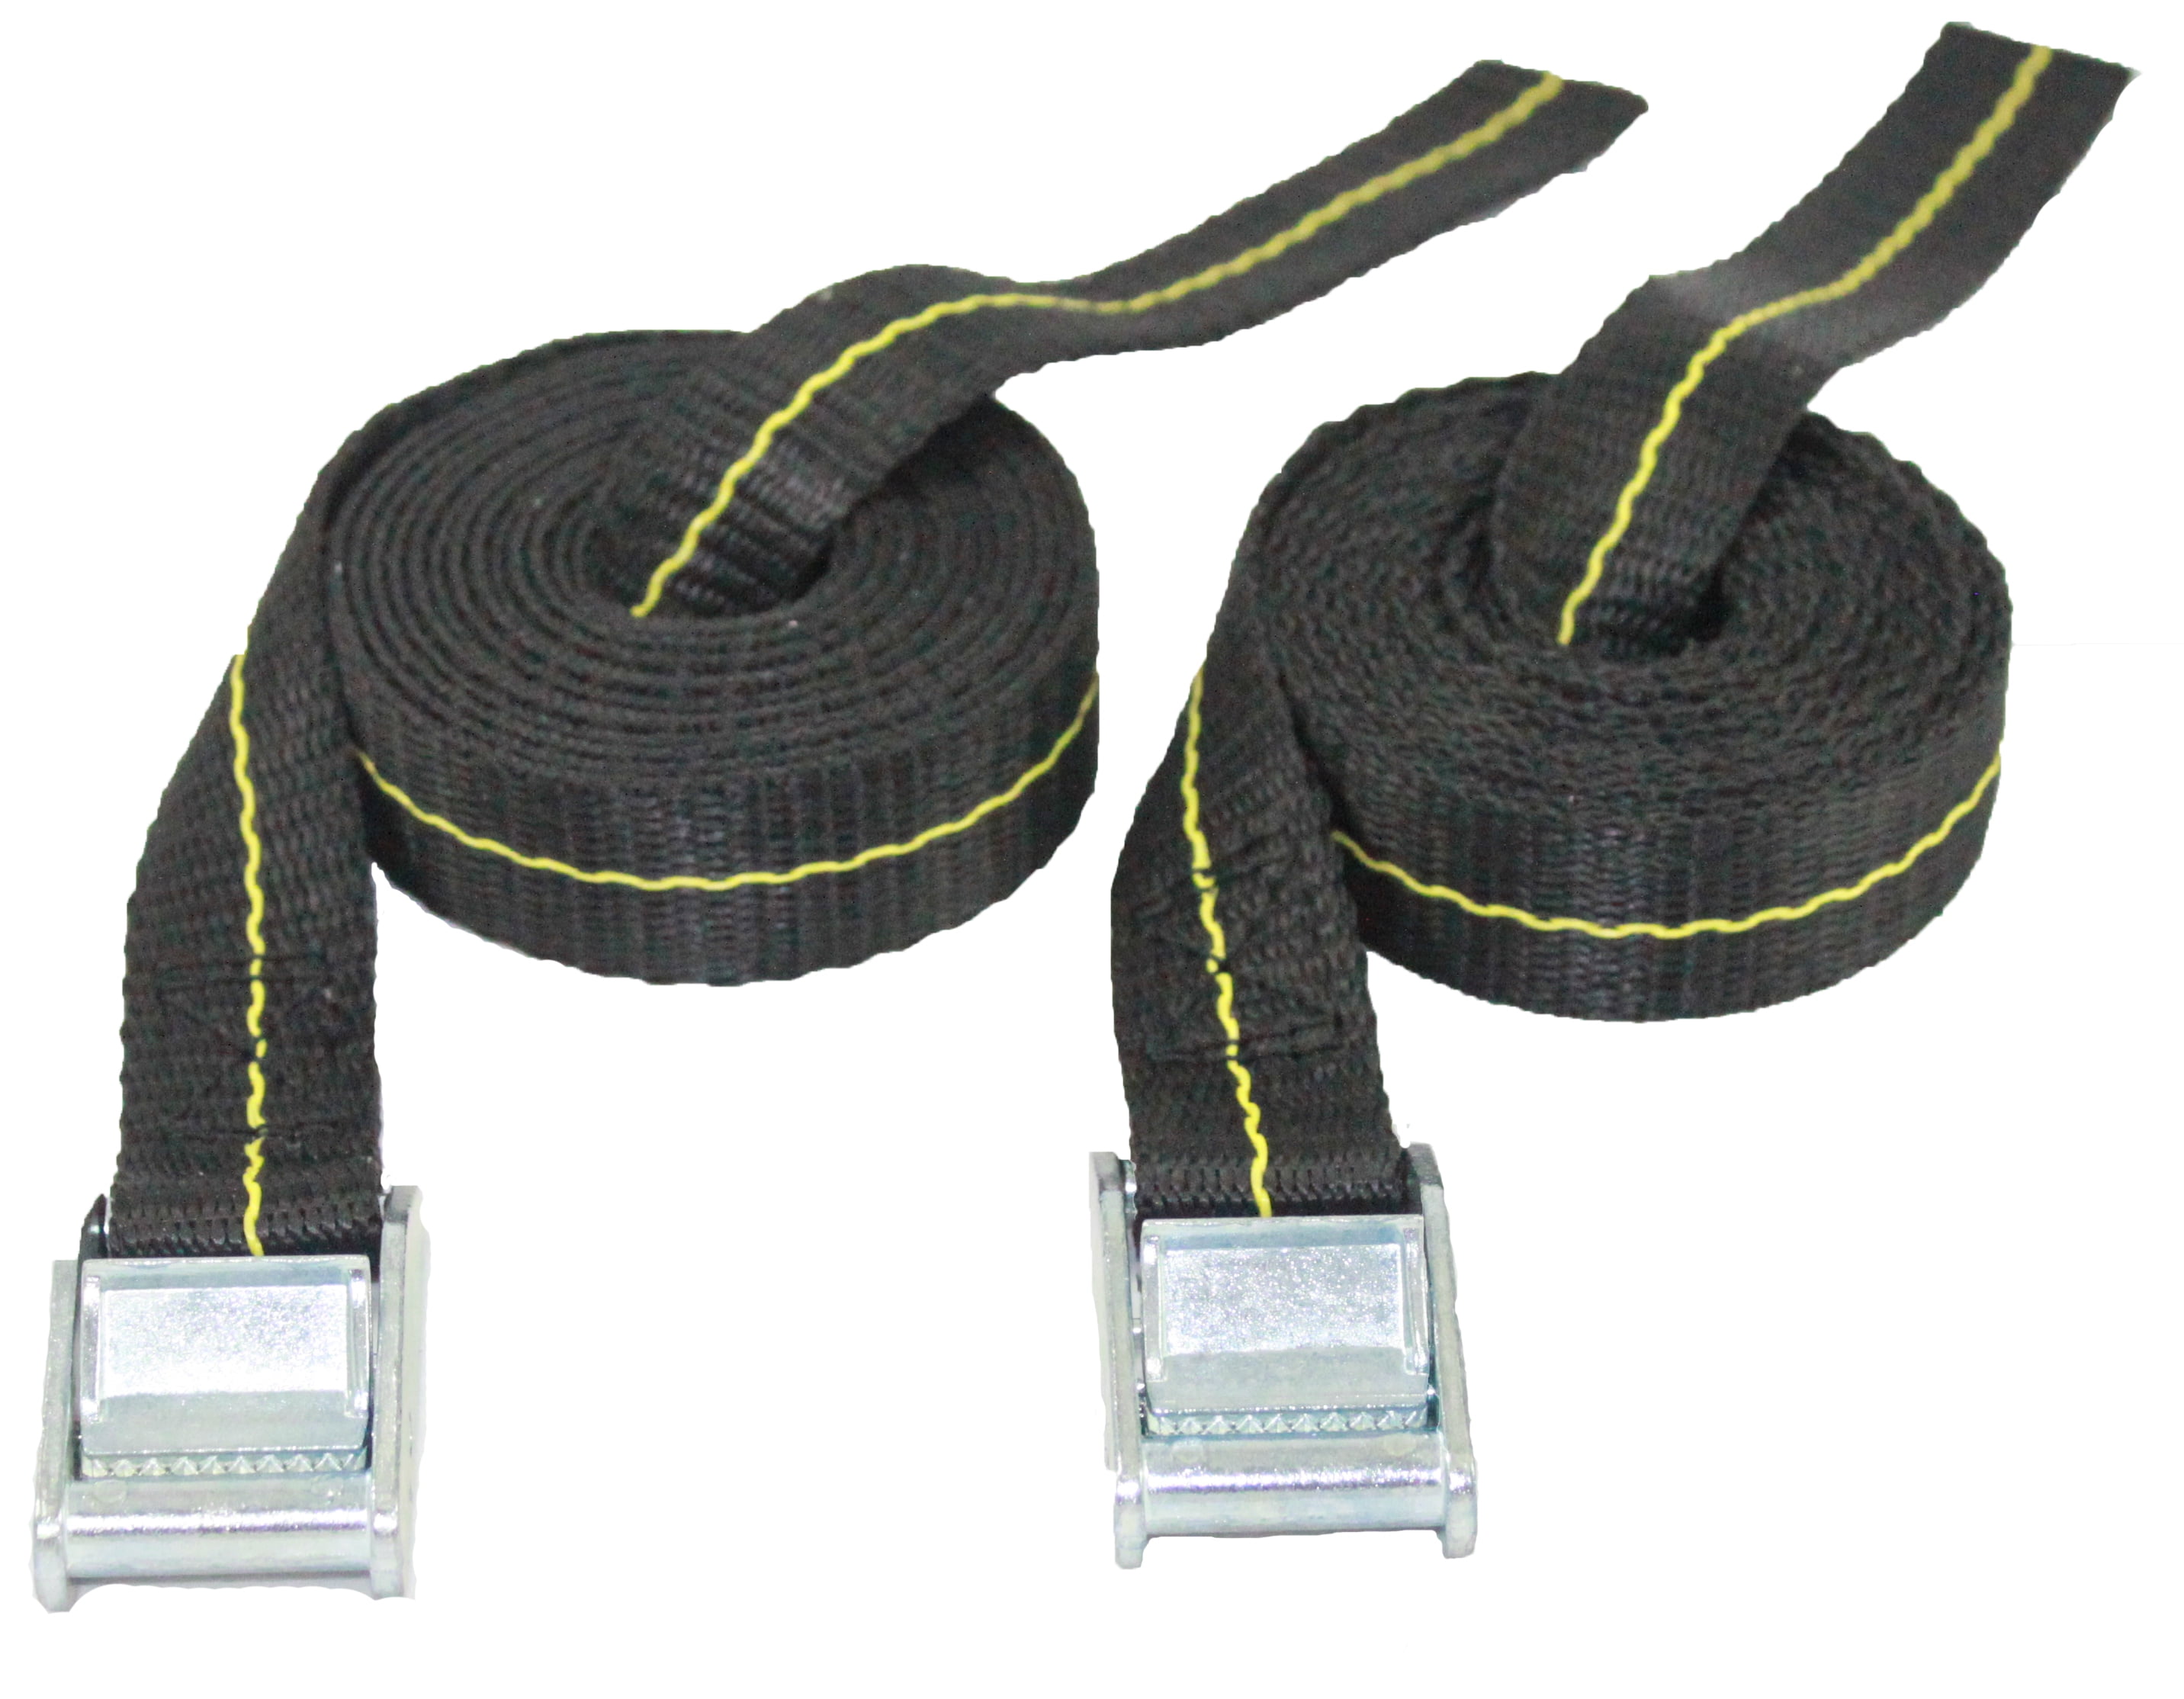 8pc set  Tie Down Strap kit for hauling Canoes and Kayaks w/ carrying bag 